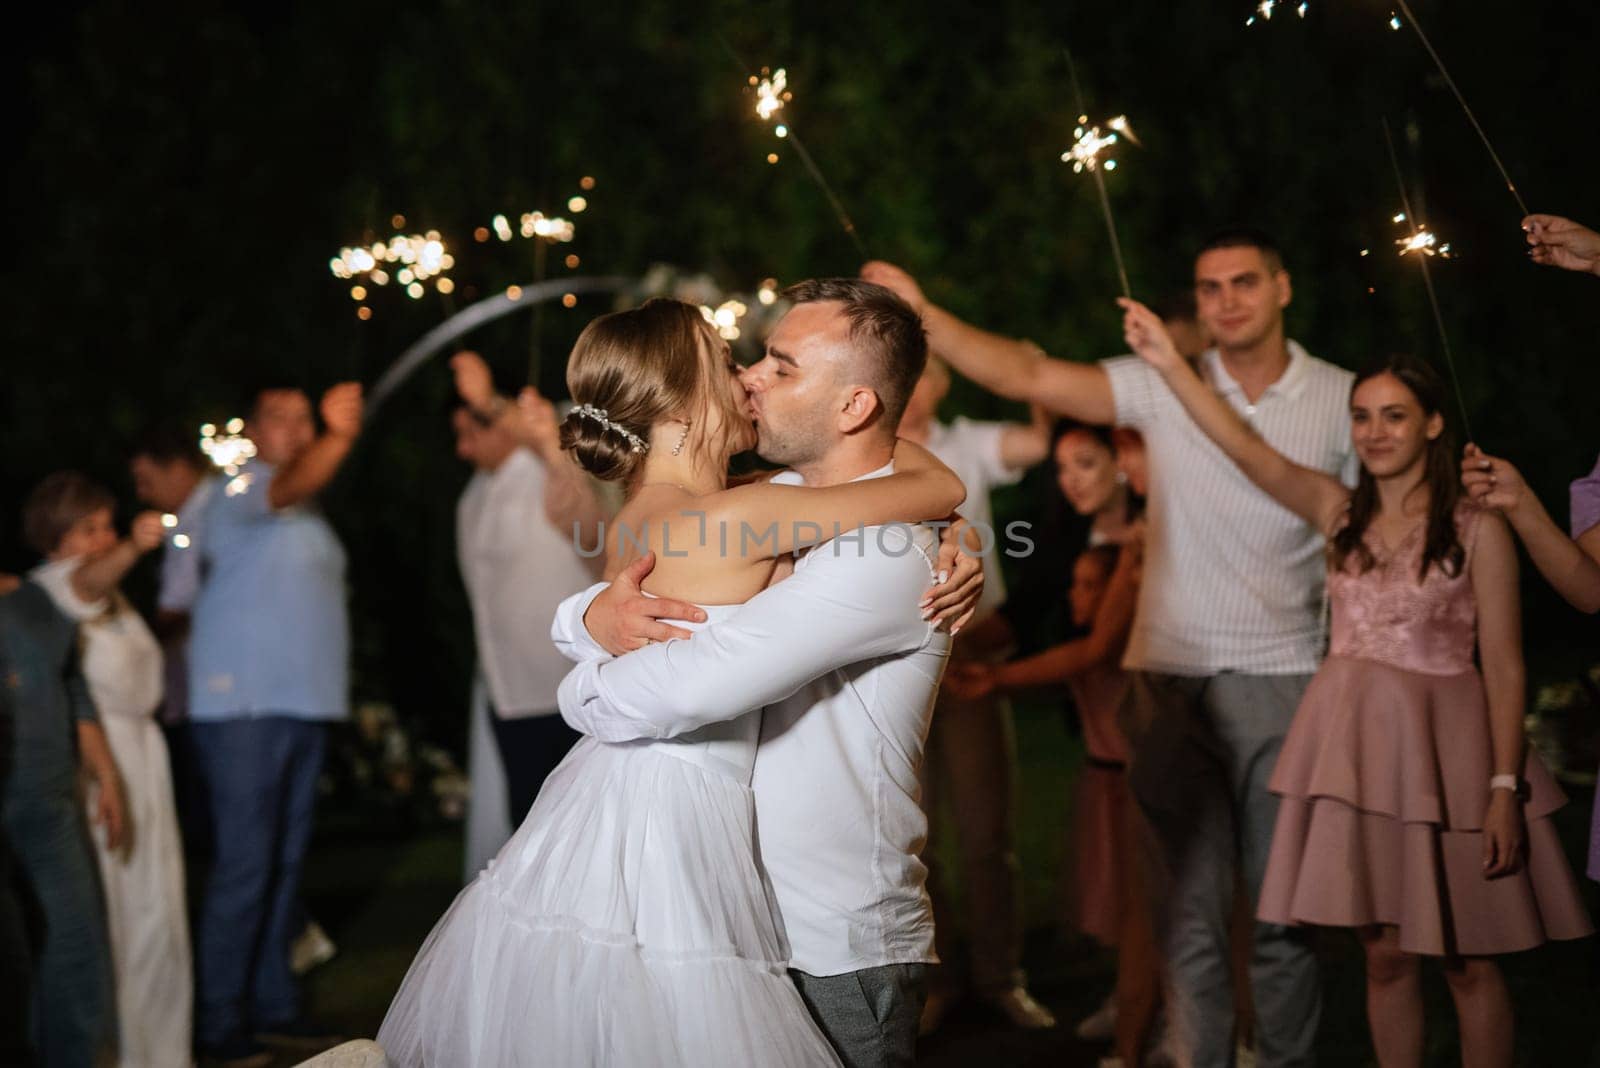 newlyweds at a wedding of sparklers by Andreua